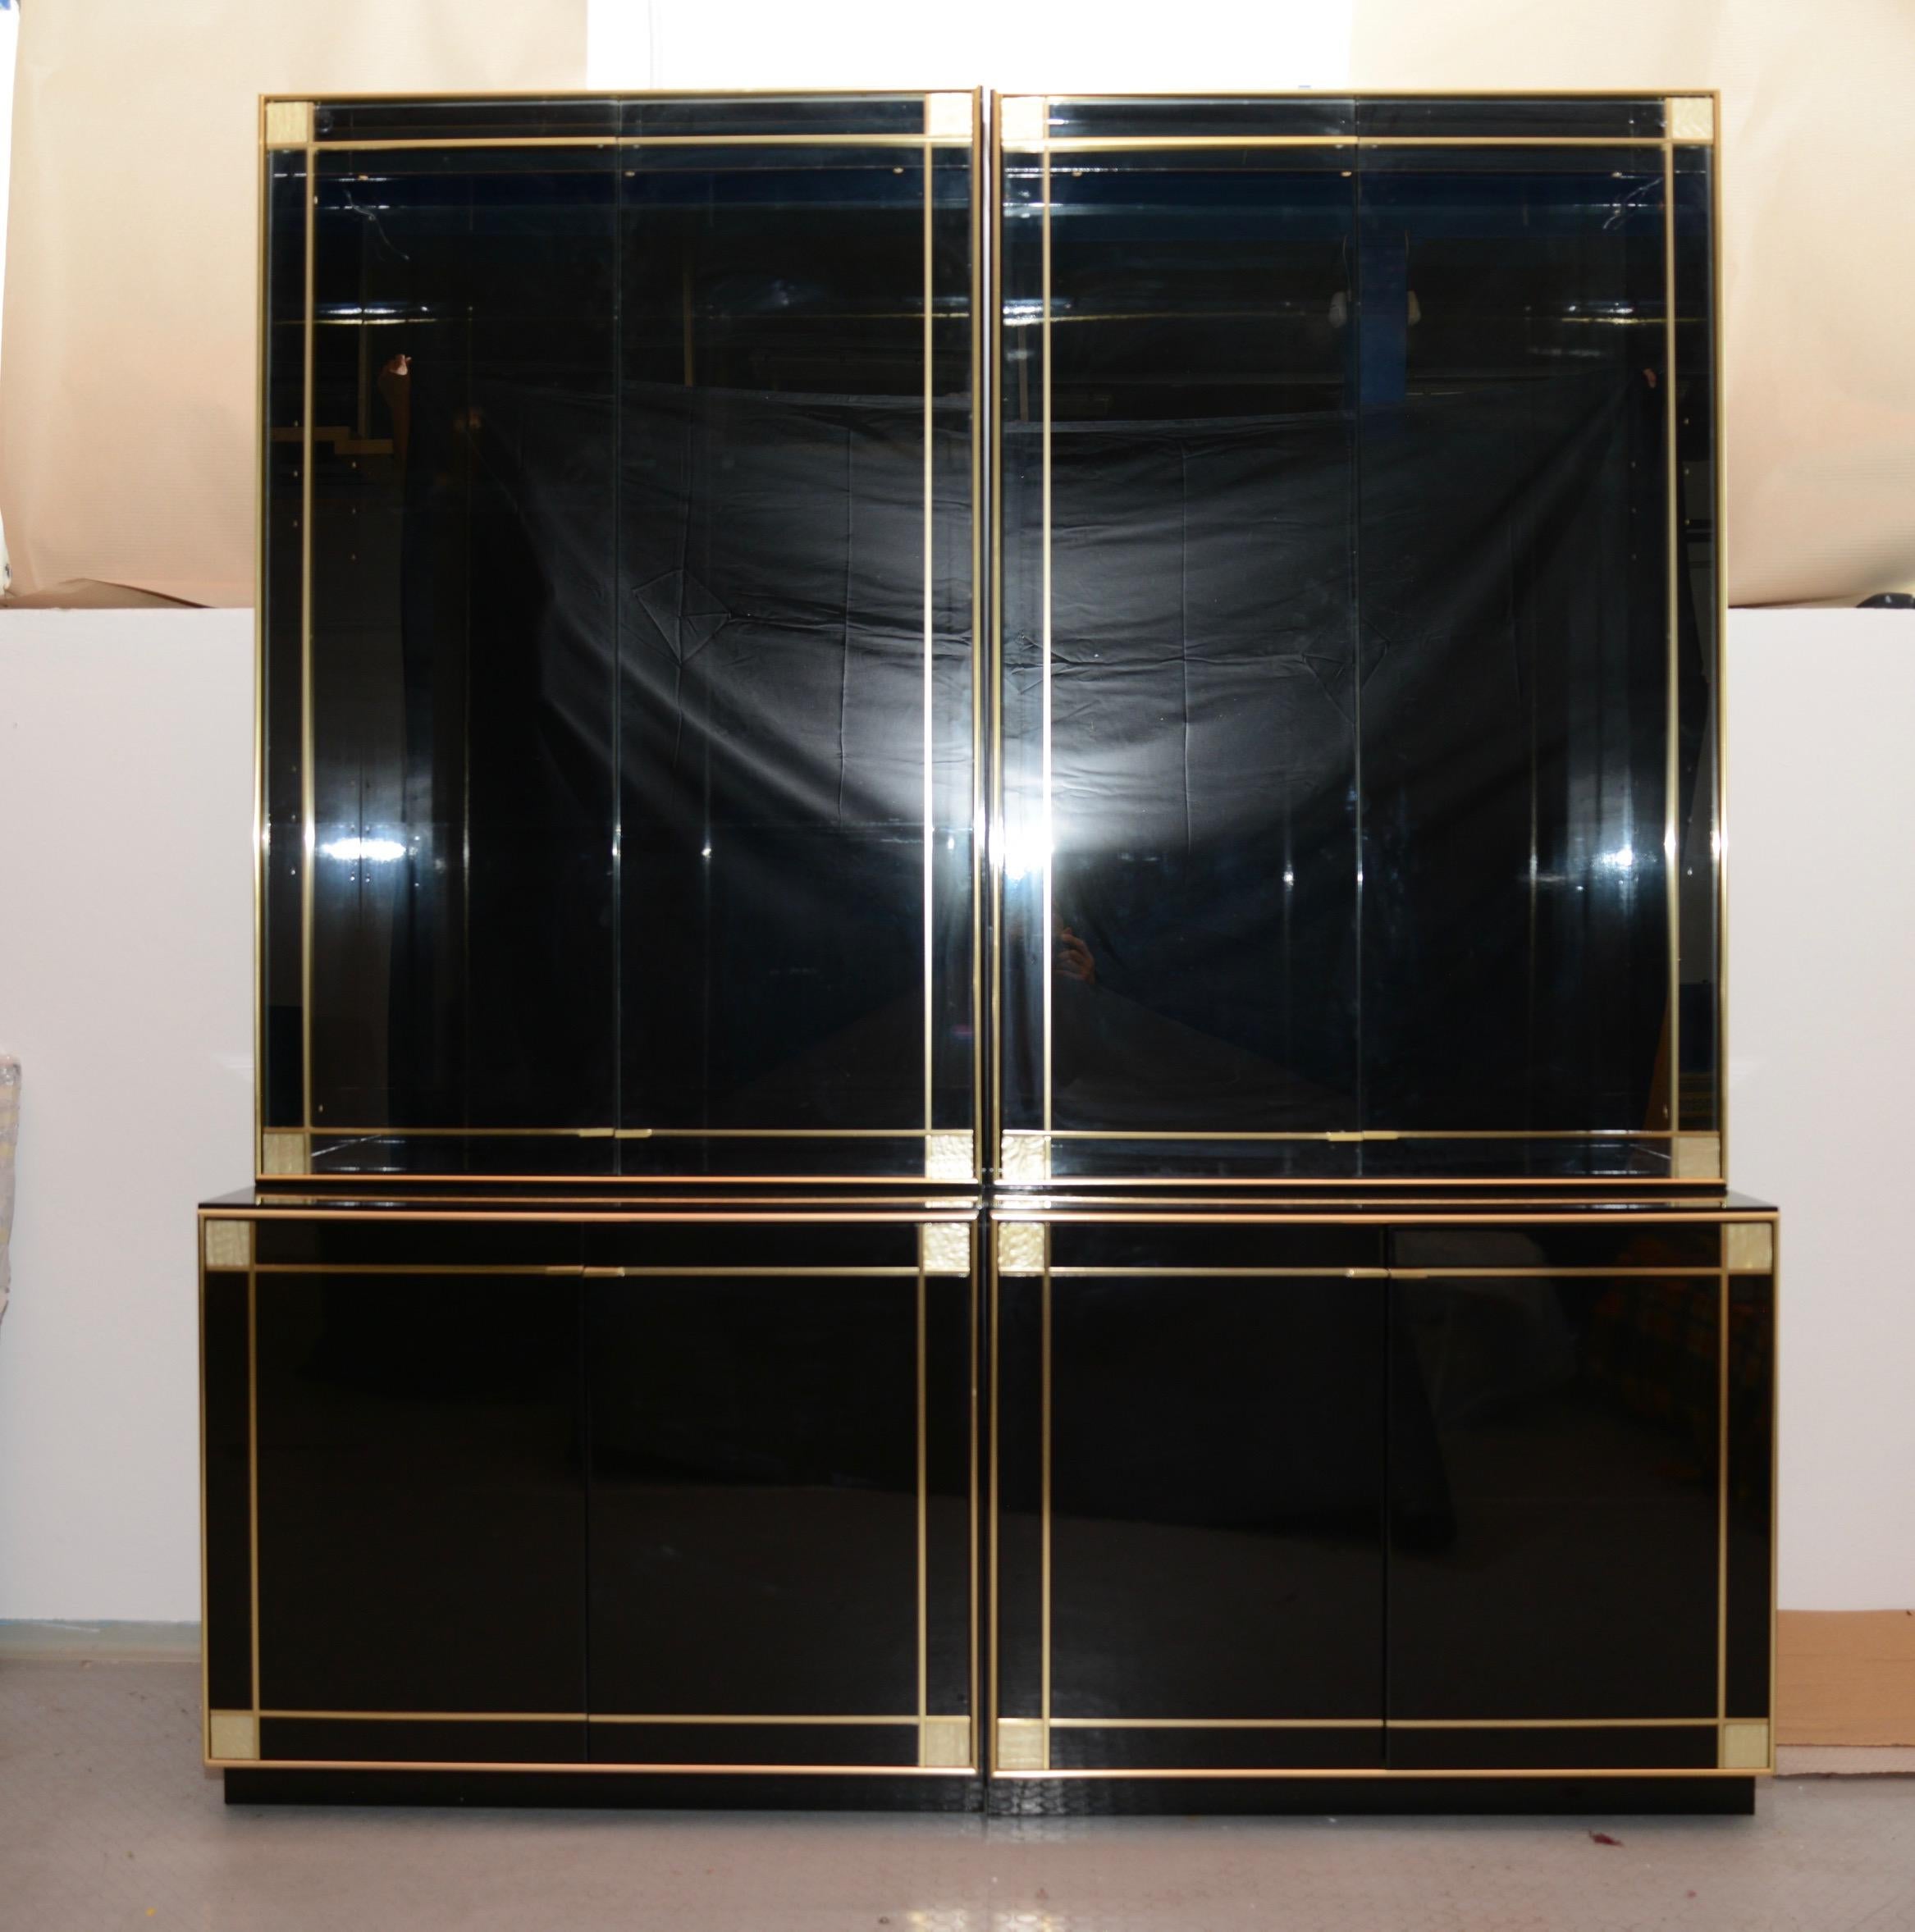 French midcentury lacquered vetrines by Pierre Cardin for Roche Bobois. This pair is made of black lacquer on wood and features gilt brass trim throughout. The strong craftsmanship combined with the elegant lines made this pair a fabulous dining